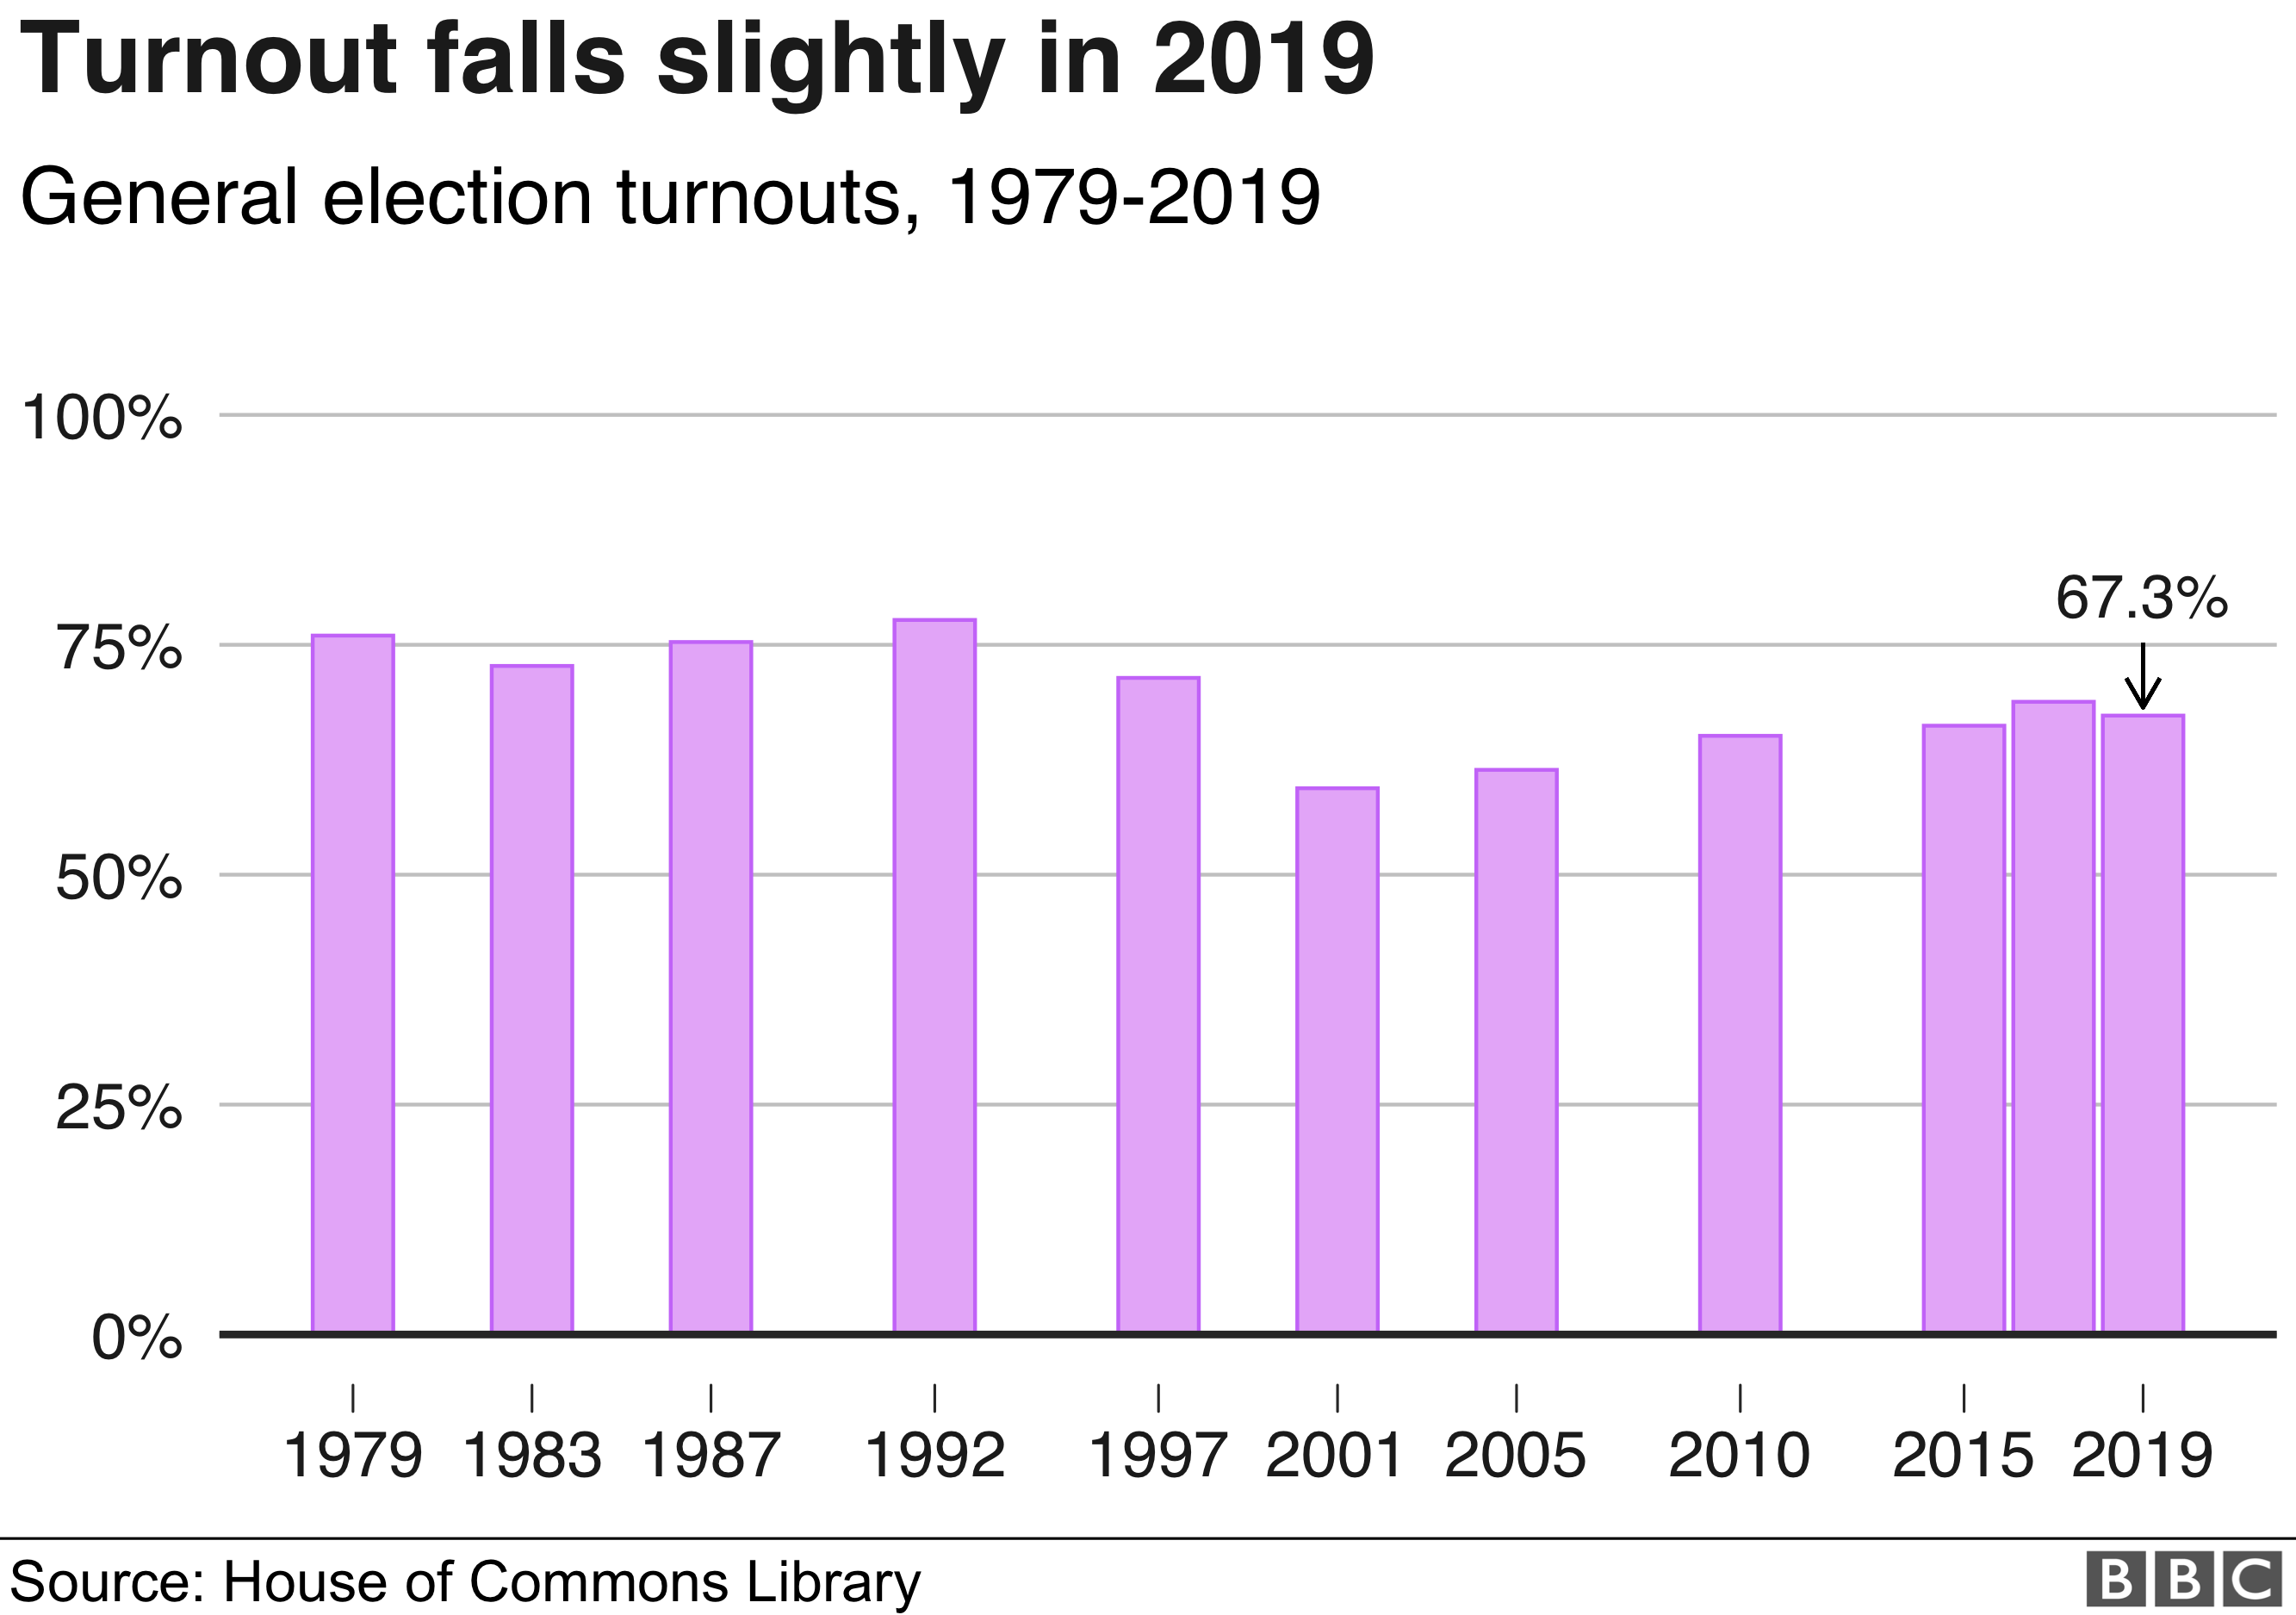 Turnout at UK elections, 1979-2019